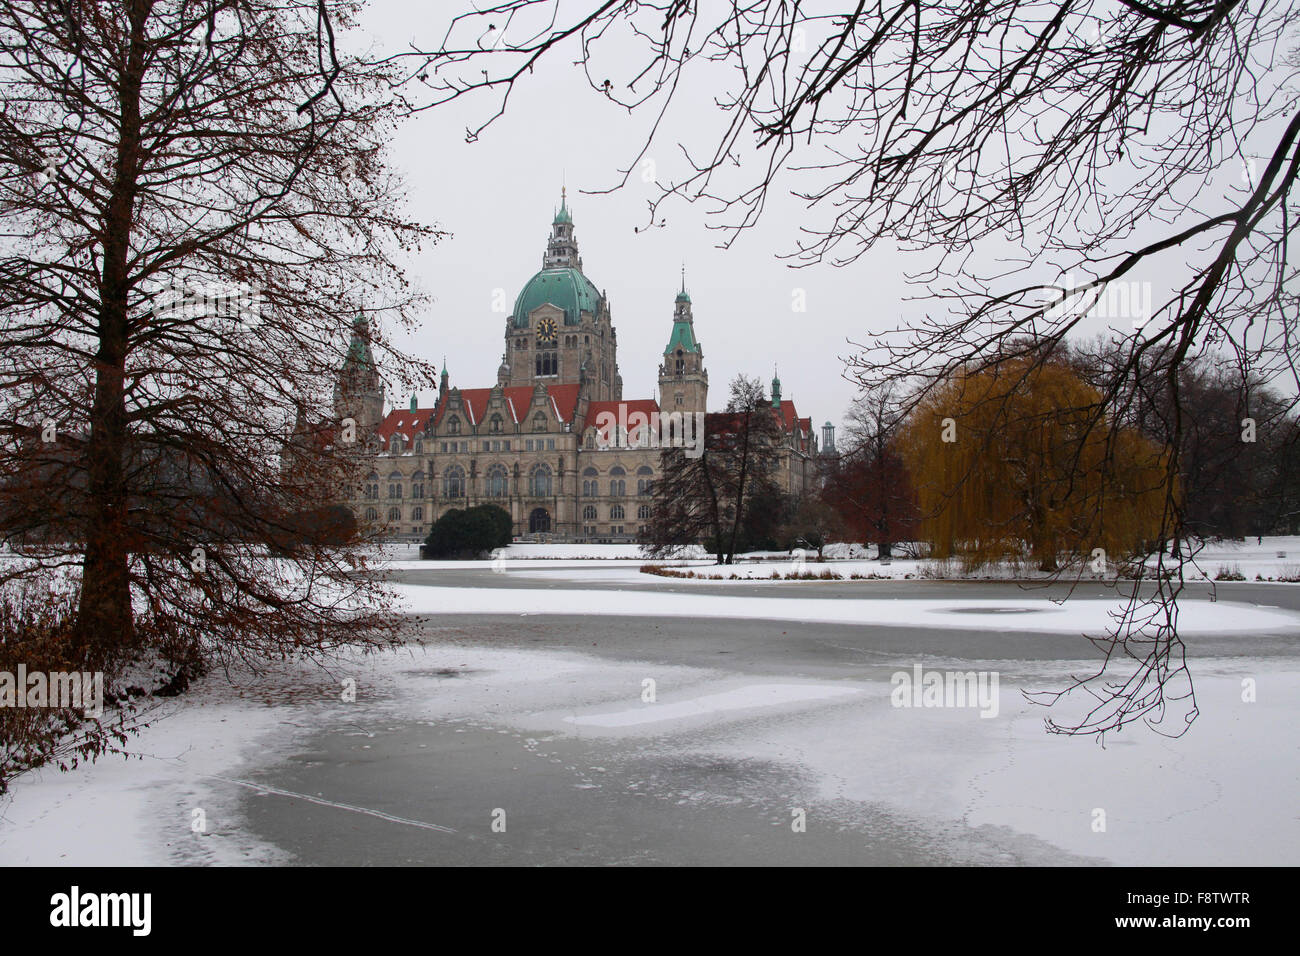 Hannover Rathaus town hall in inverno con neve city palace maschpark maschteich Foto Stock